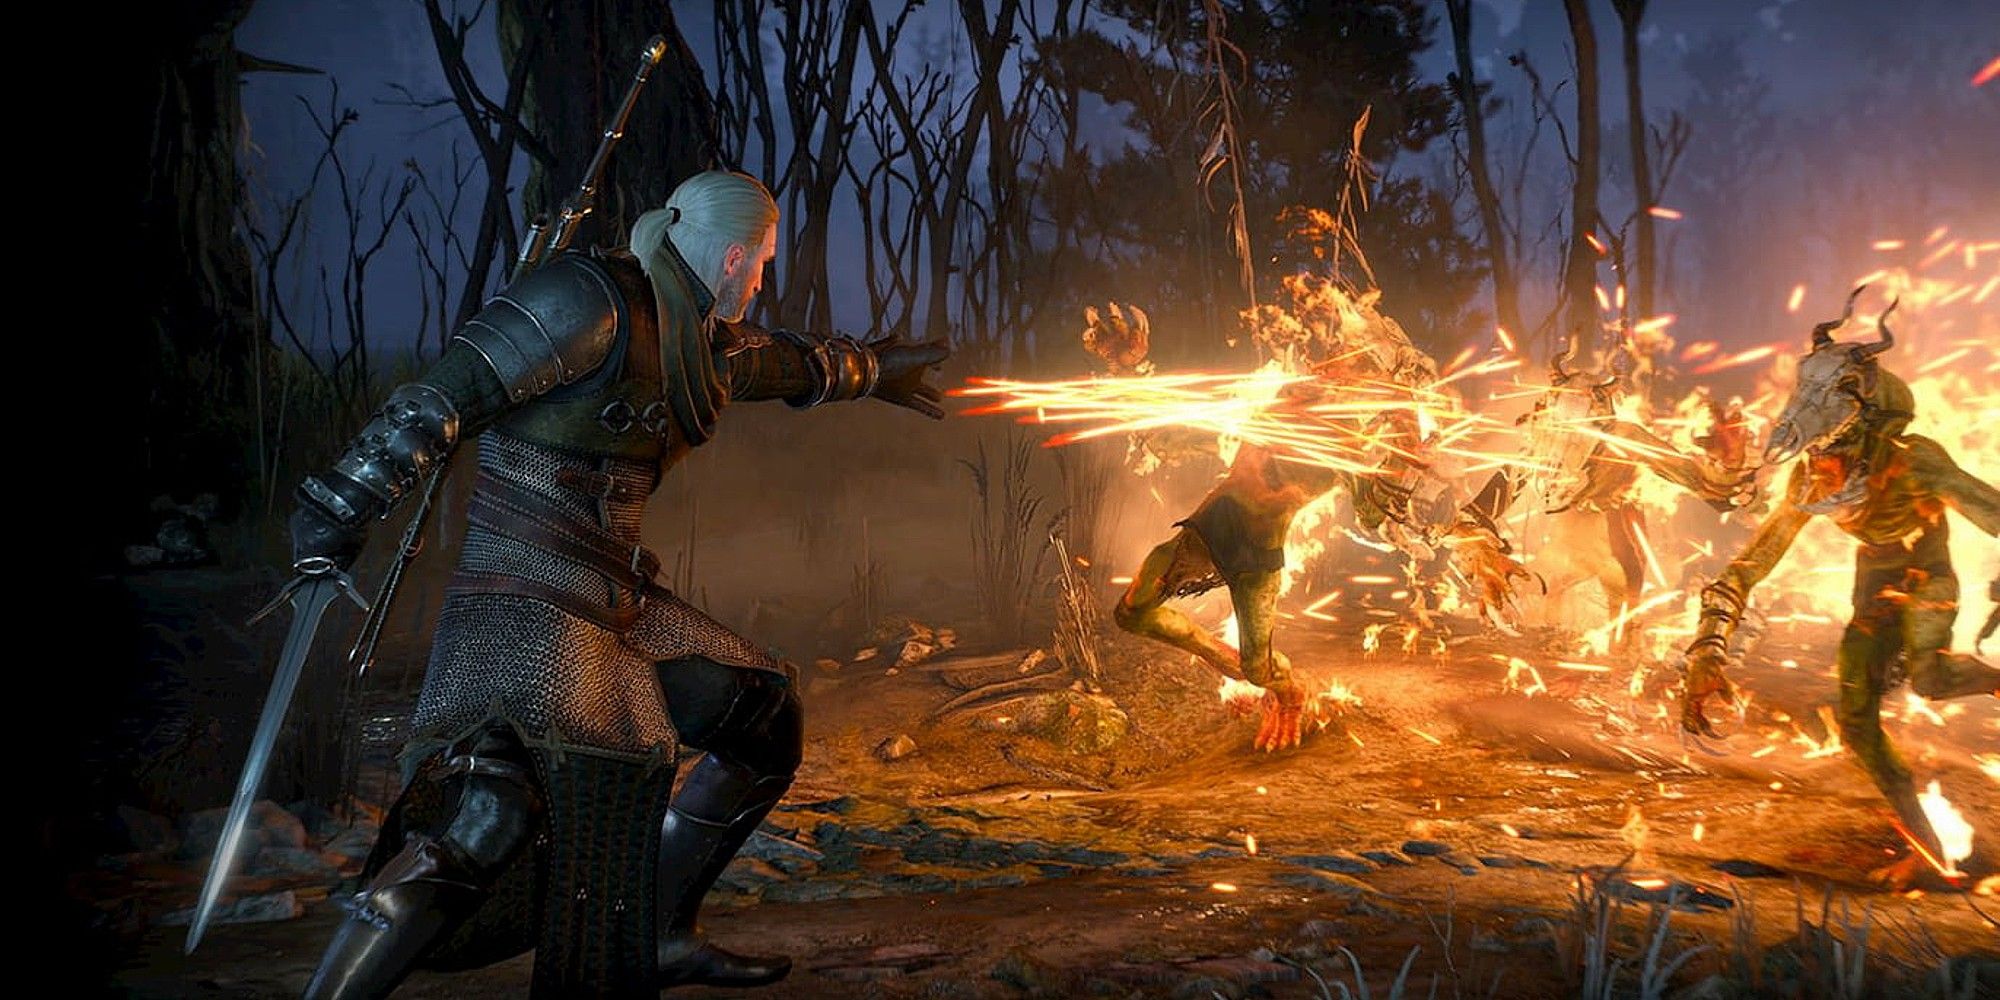 The Witcher 3 PS5 And Xbox Series X Update Gets PEGI Rating